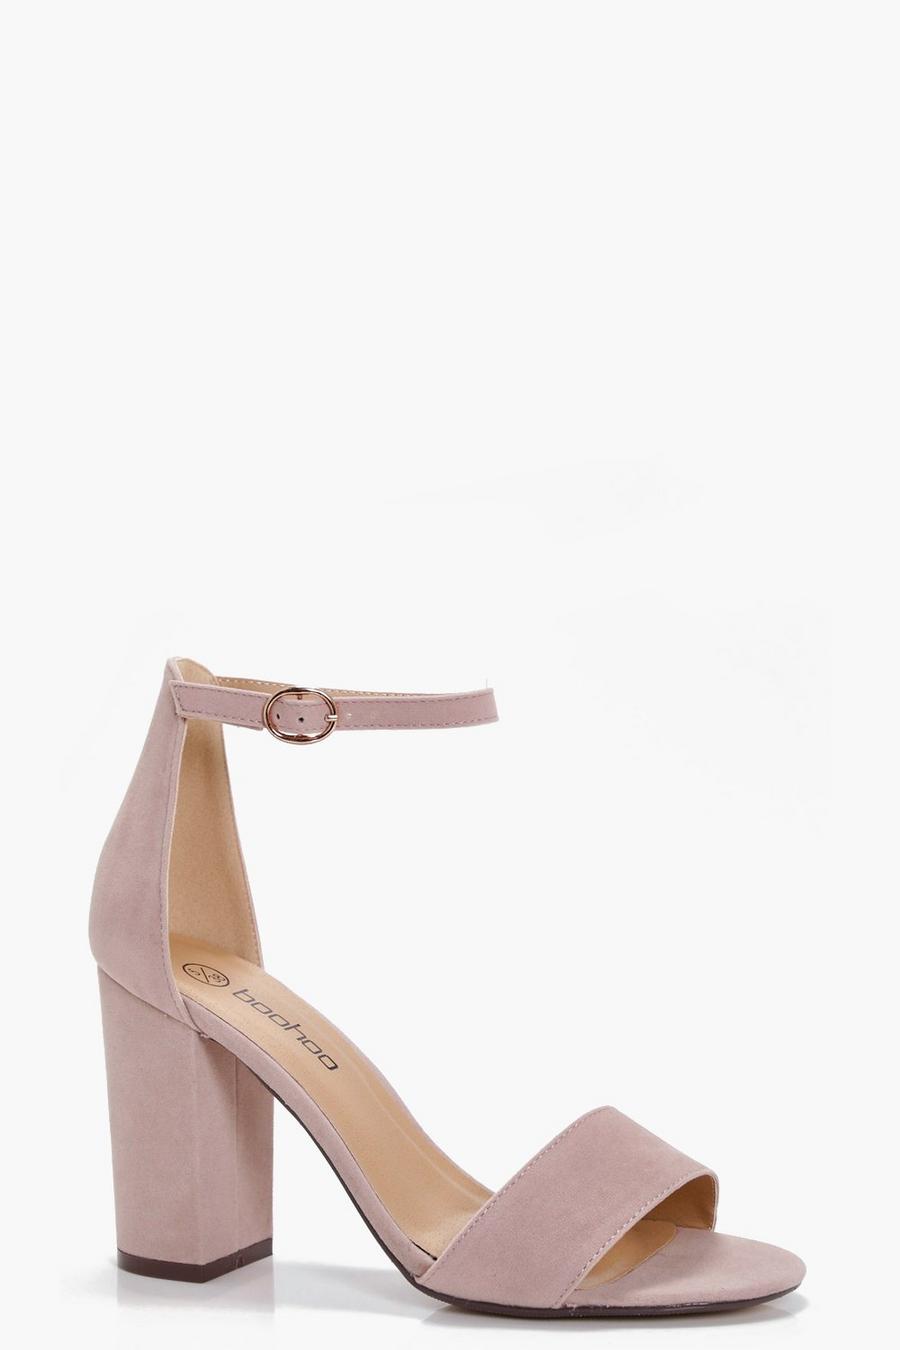 Taupe Two Part Block Heels